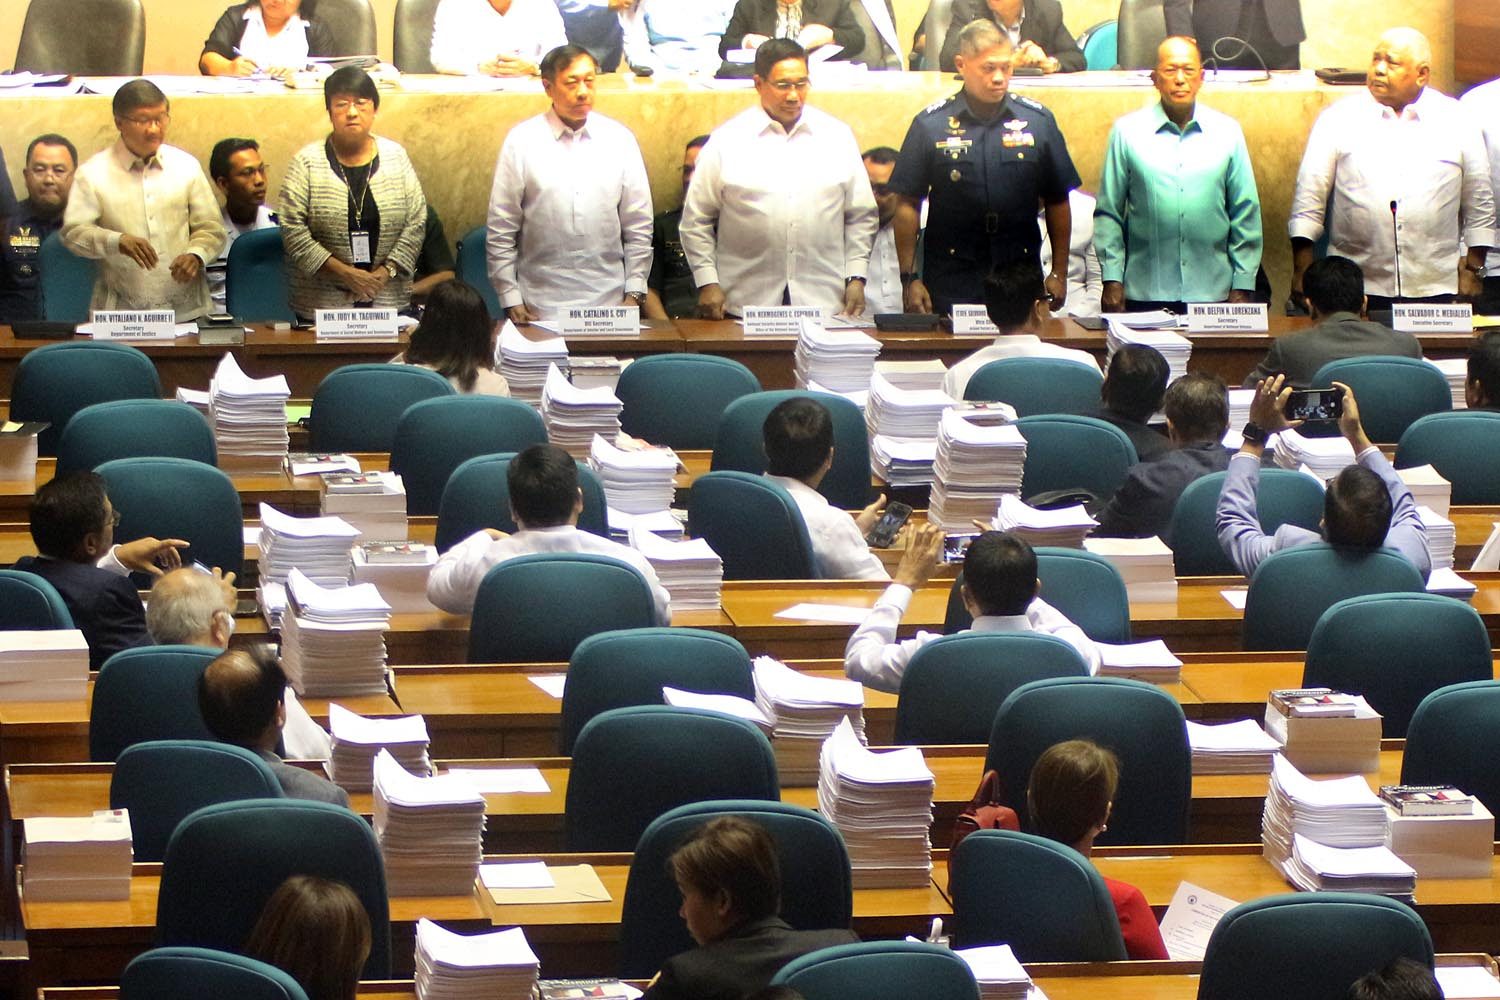 BRIEFING. In this file photo, Cabinet members attend a briefing by security officials on martial law in Mindanao at the House of Representatives. Photo by Darren Langit/Rappler